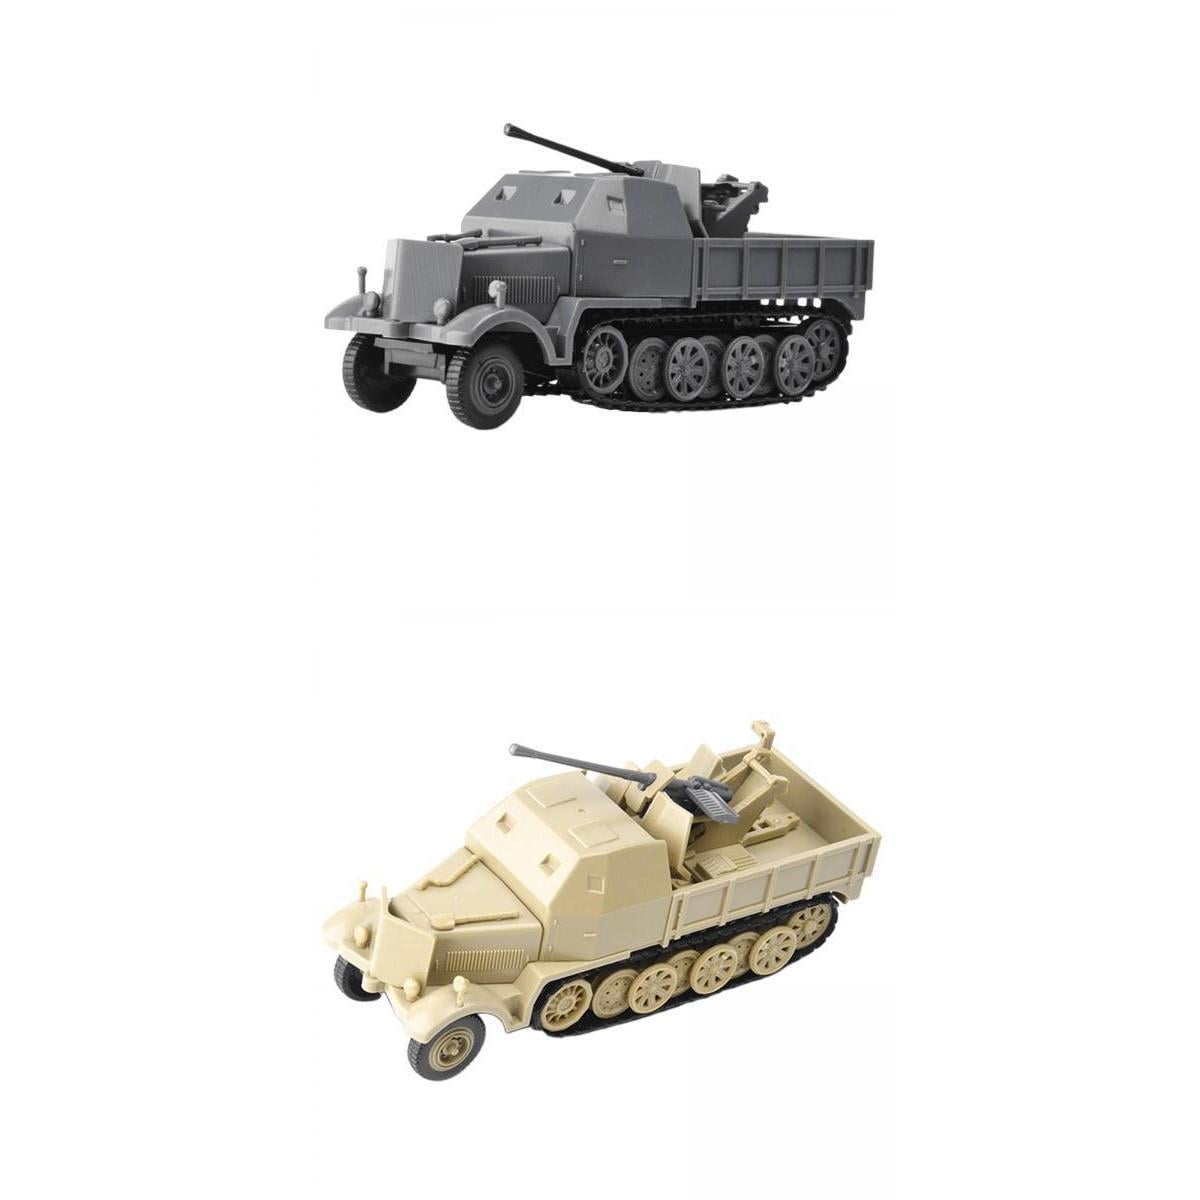 Details about   1:72 Classic Half Track Armored Vehicle Toys 4D Assembled Vehicle Model 